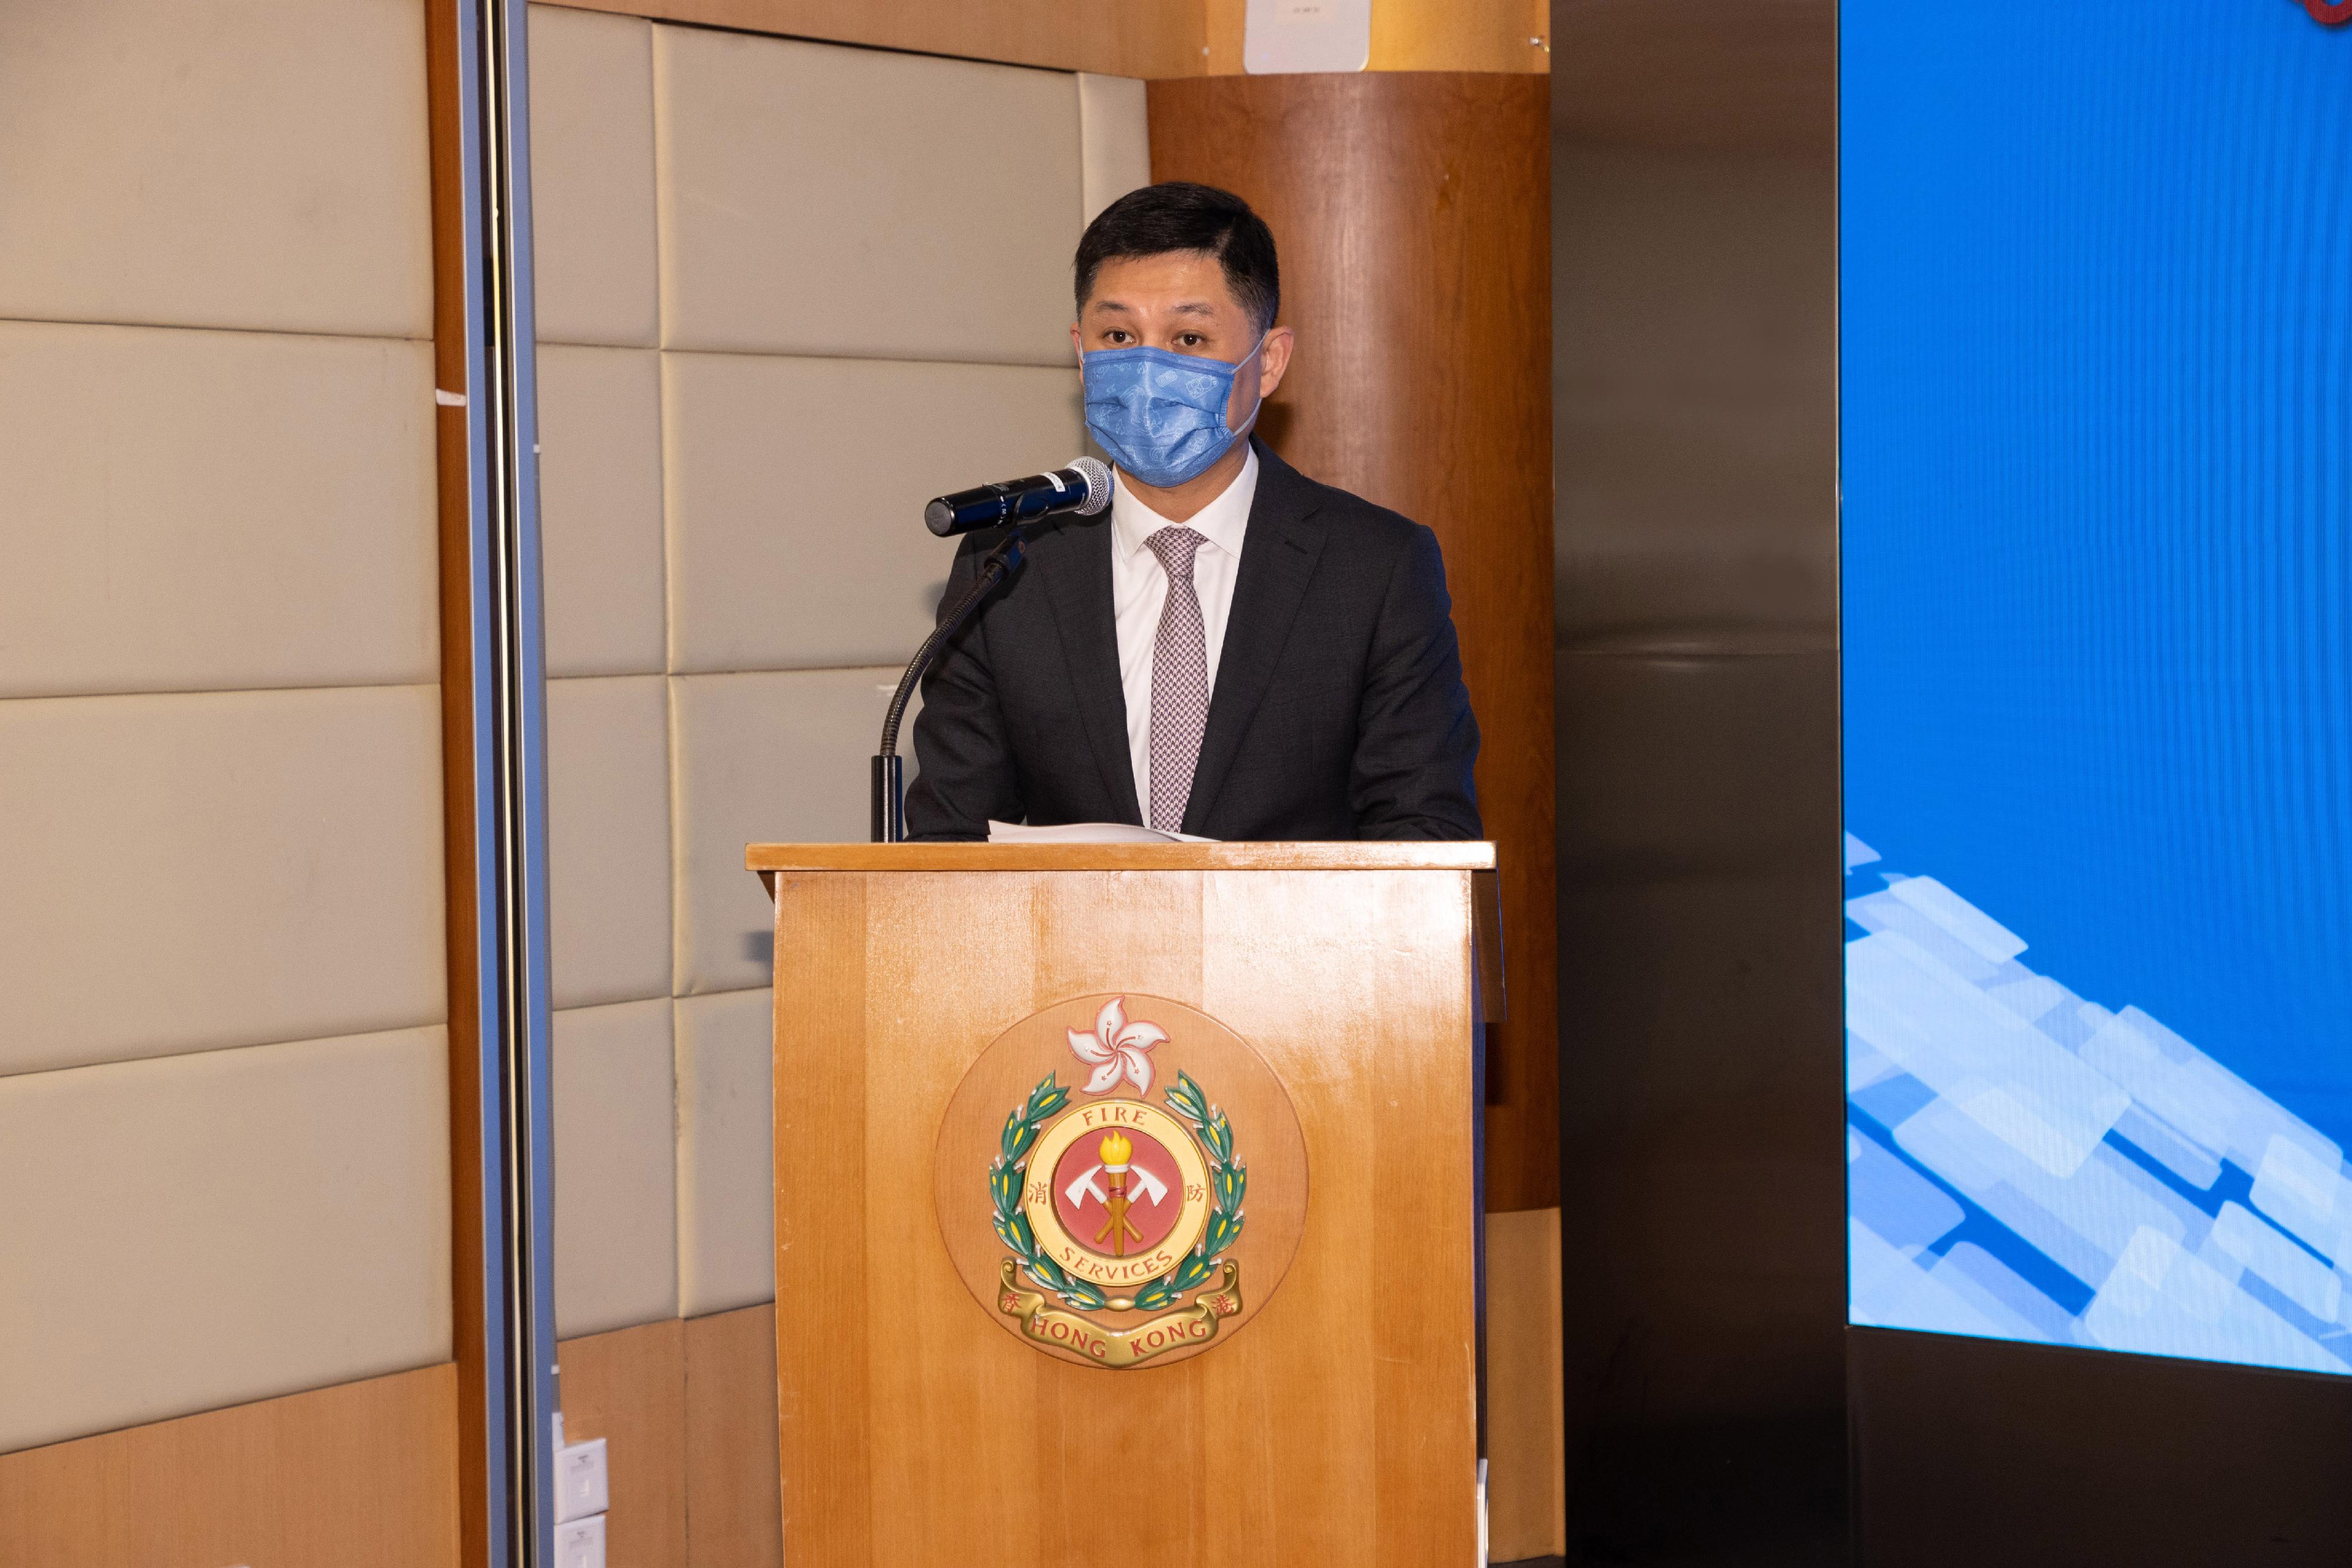 The Fire Services Department and The Hong Kong Polytechnic University signed a Memorandum of Understanding today (January 4). Photo shows the Director of Fire Services, Mr Andy Yeung, speaking at the signing ceremony.